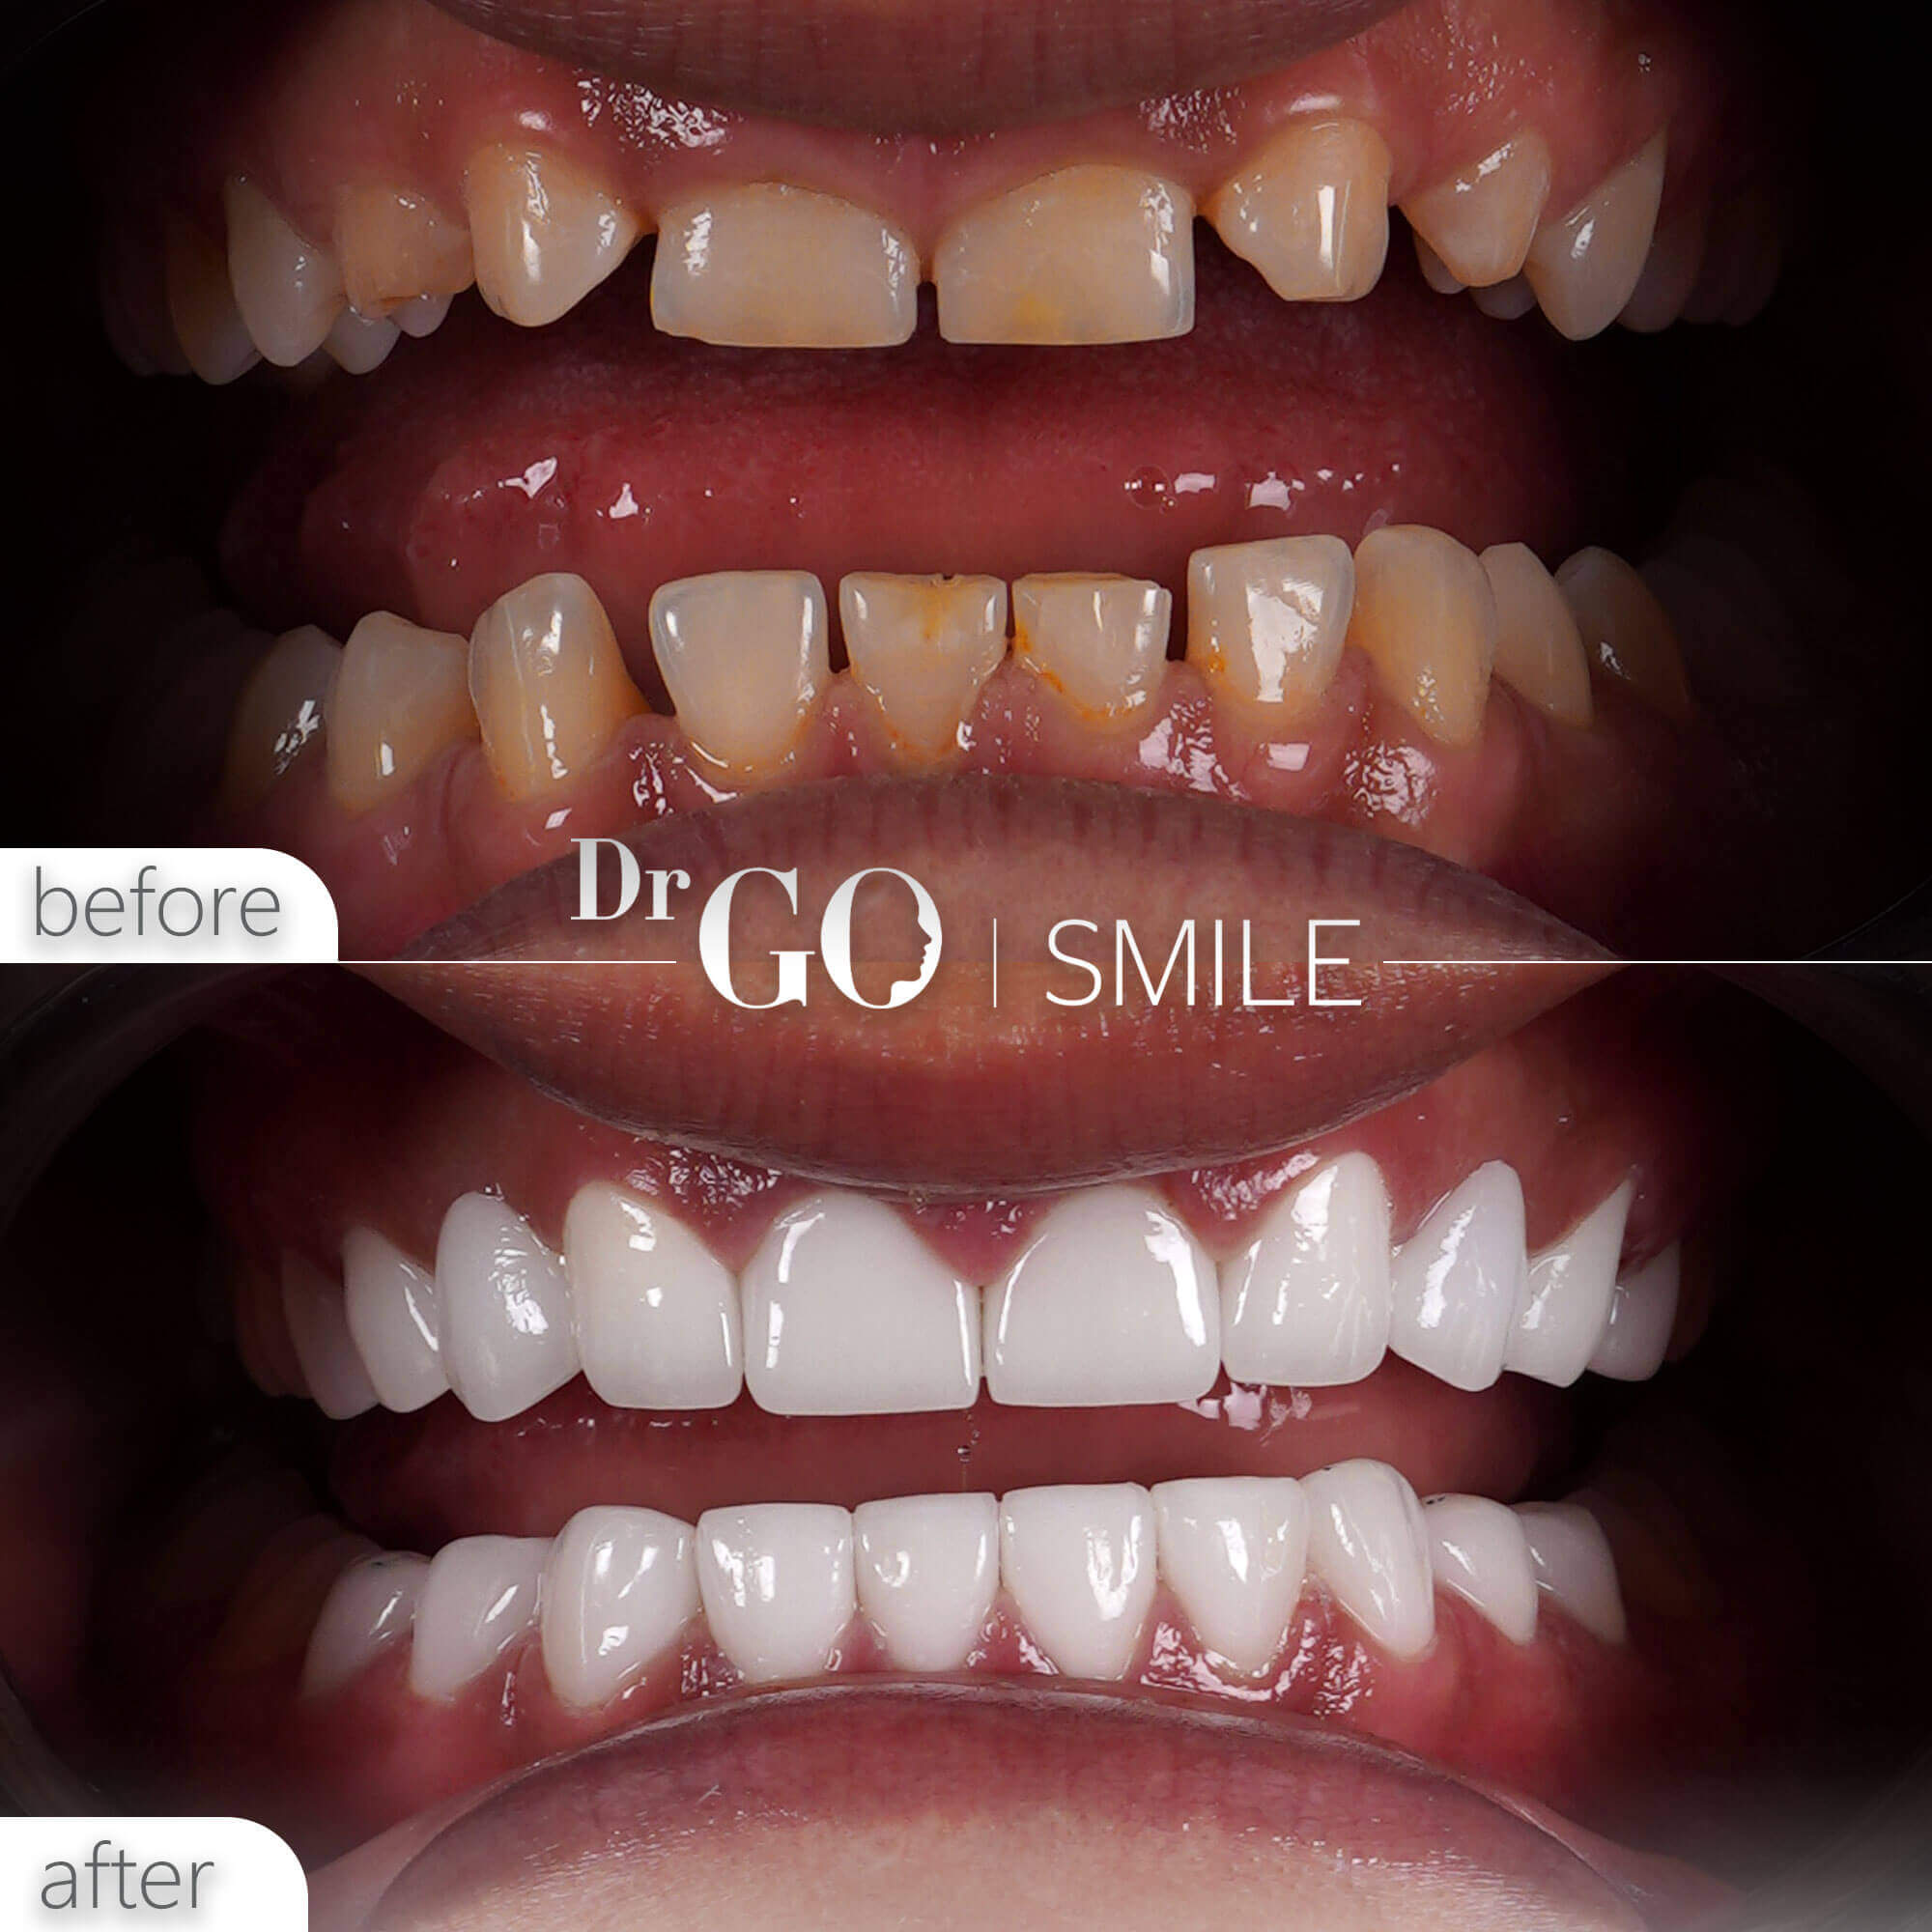 Drgo Smile Before After 4